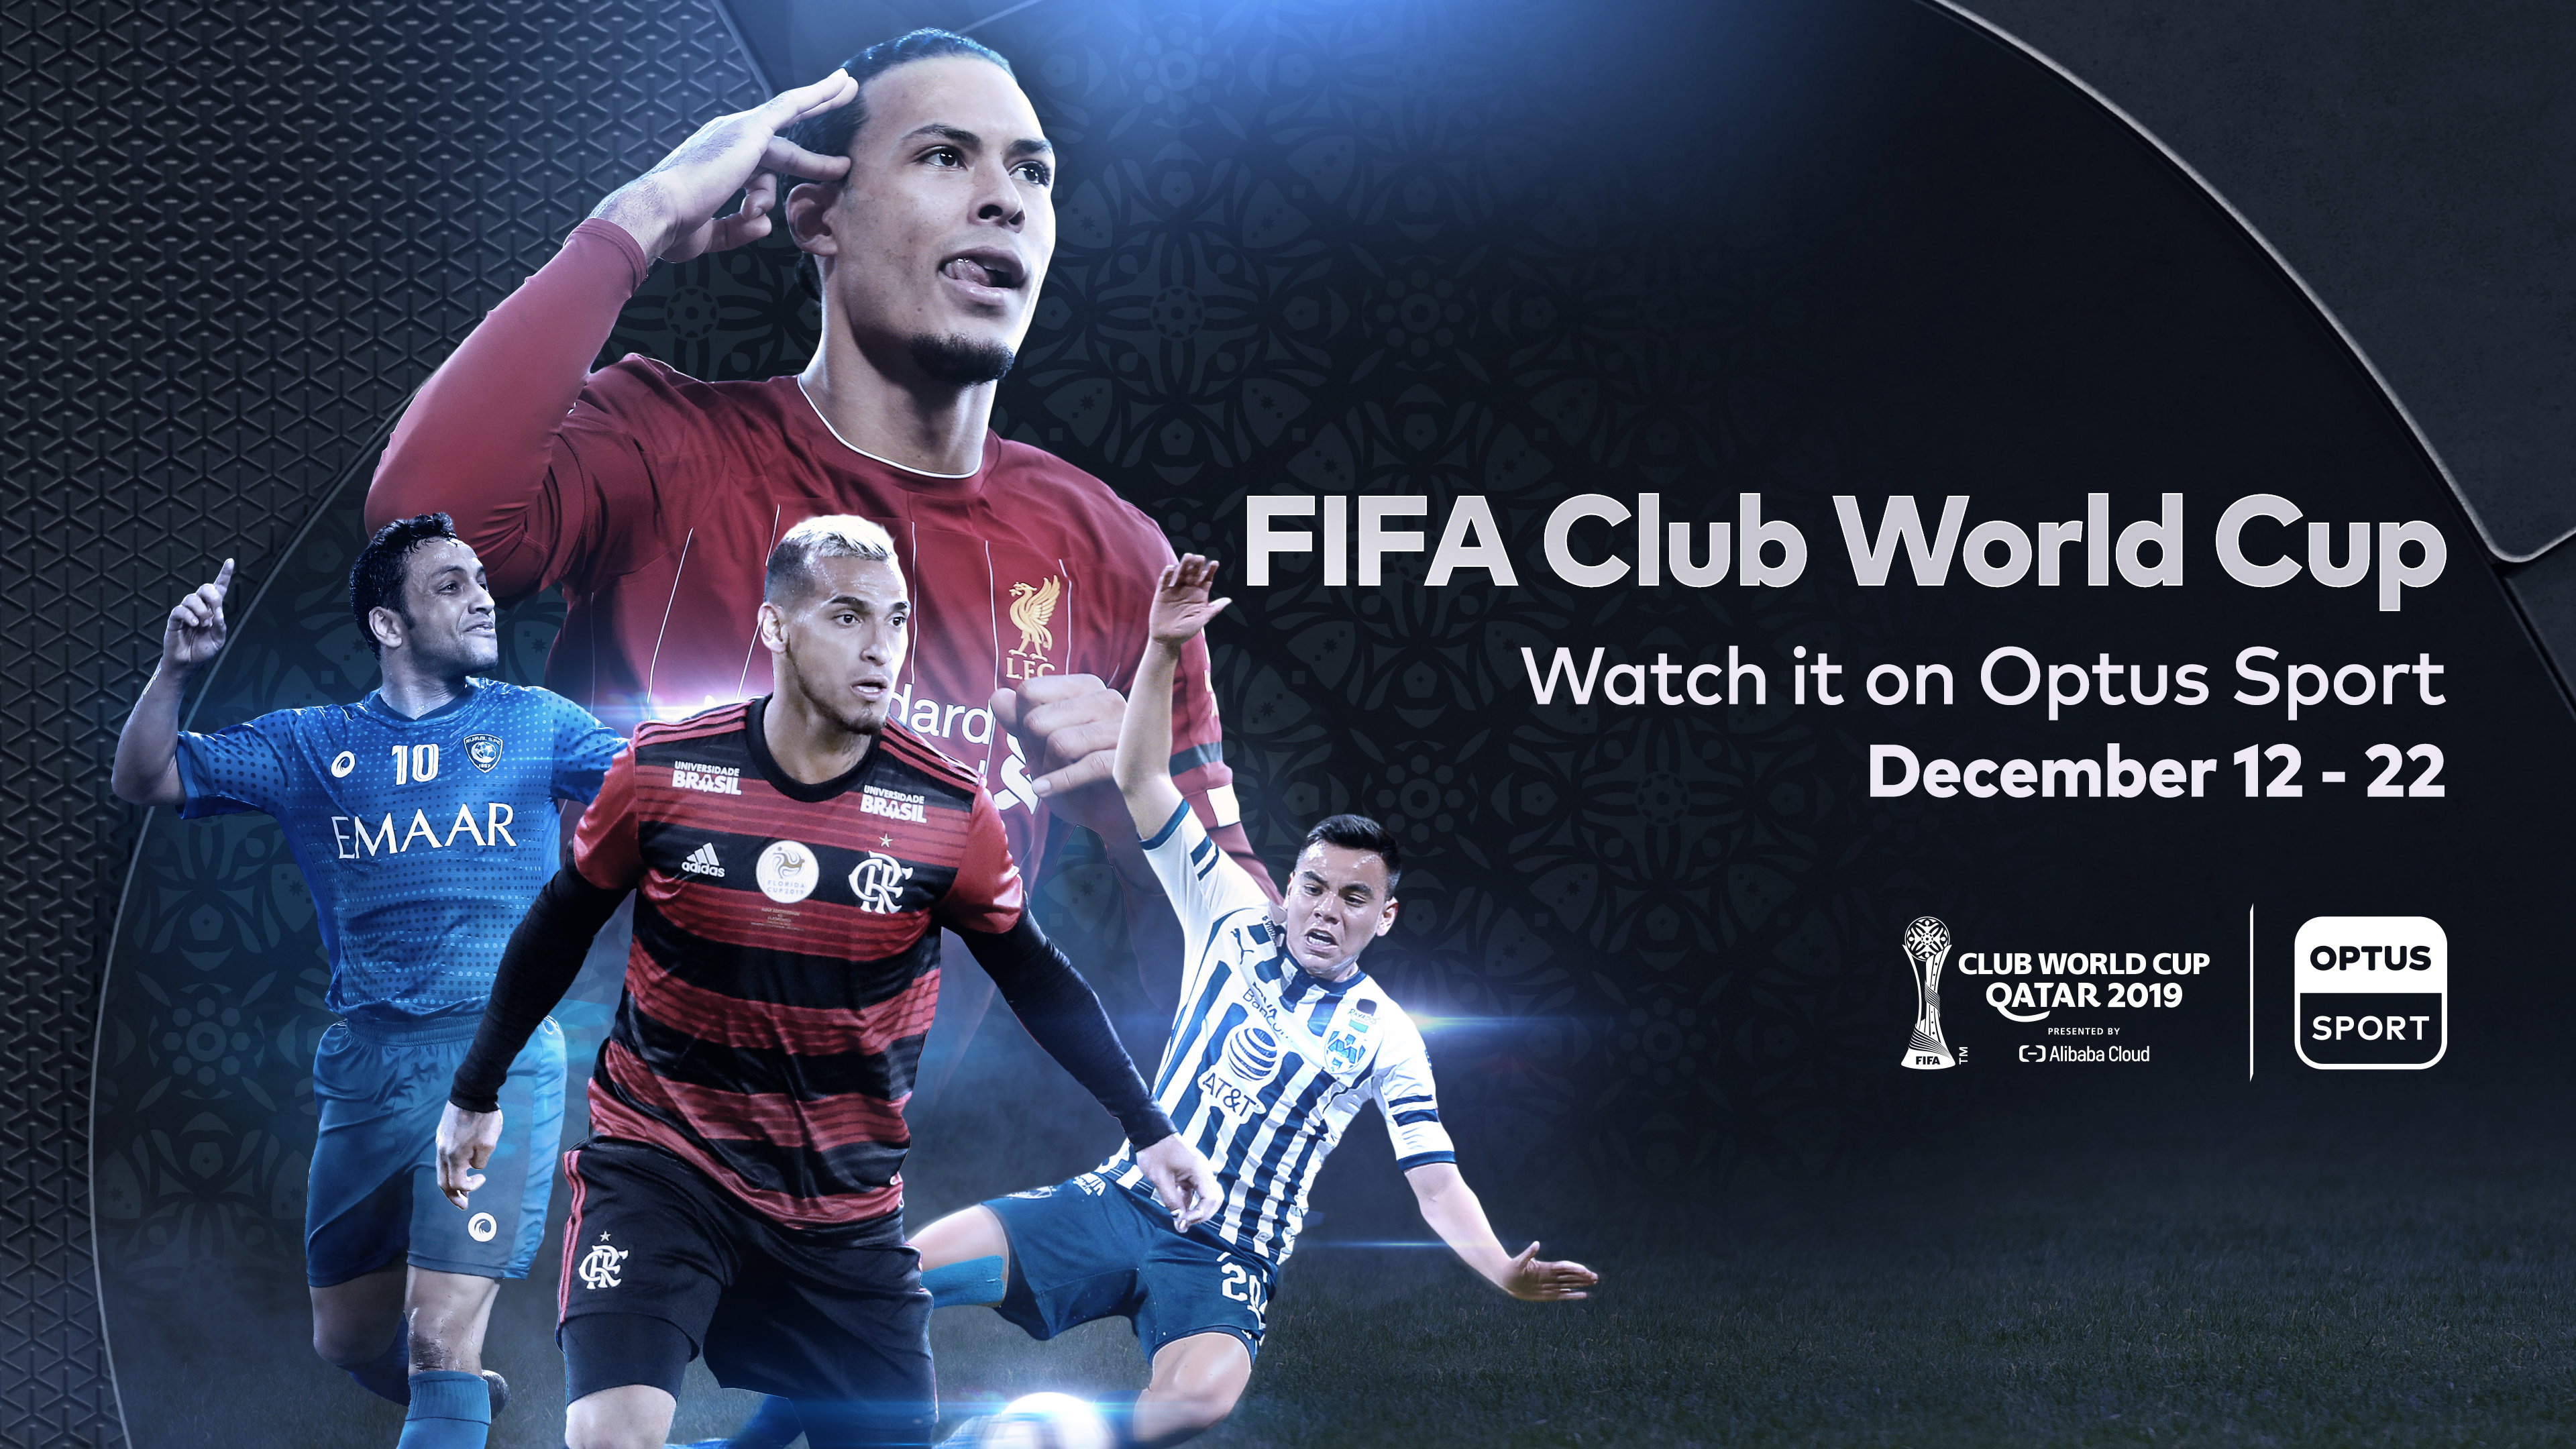 Optus Sport to broadcast the FIFA Club World Cup this month